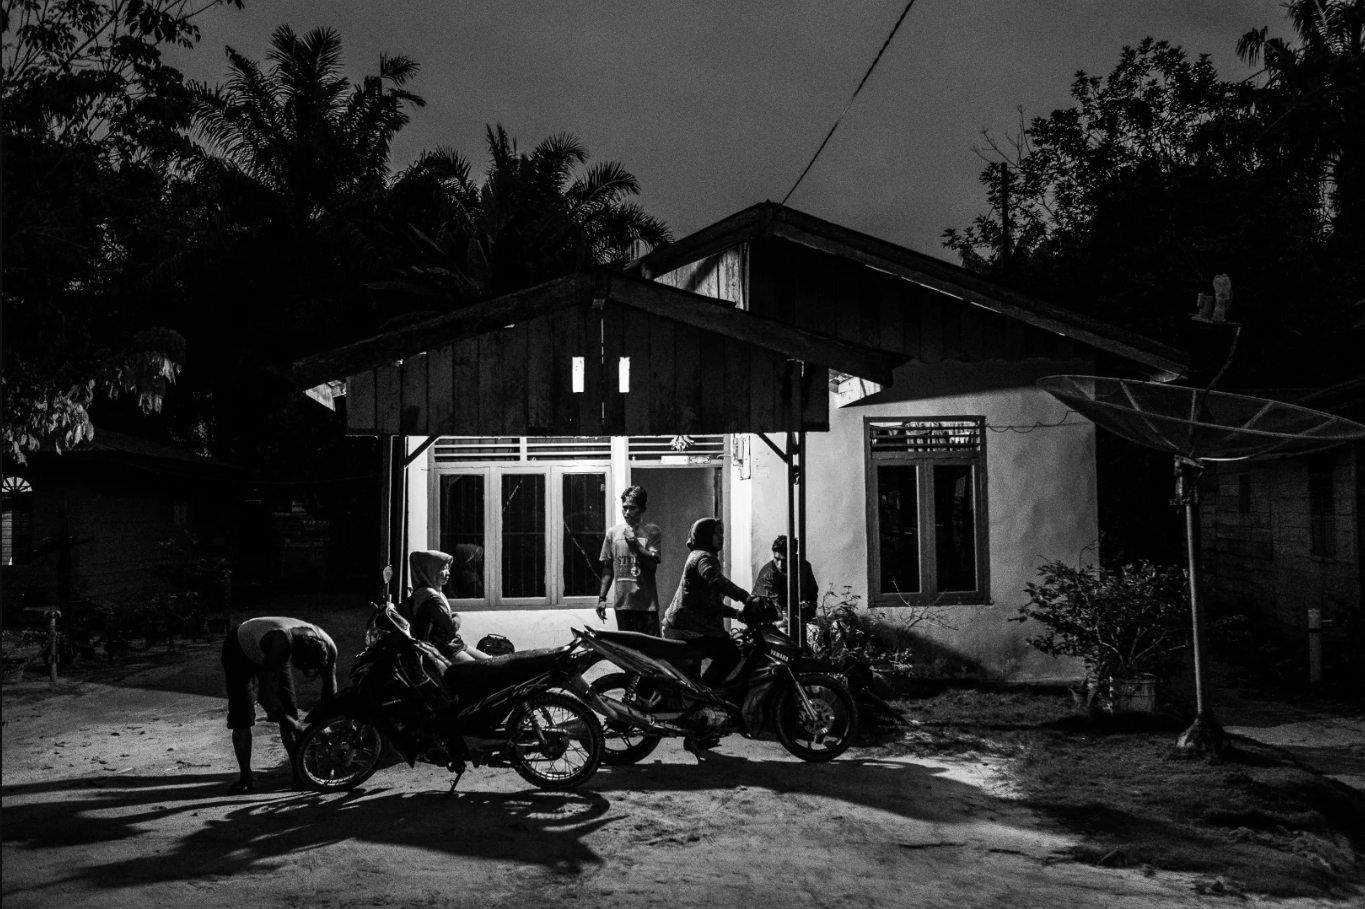 Indonesia has taken steps to reduce the impact of palm oil production on the environment, yet locals still suffer. The workers’ only hope now is for their children to leave the plantations for a better life. Image by Xyza Cruz Bacani. Indonesia, 2018.